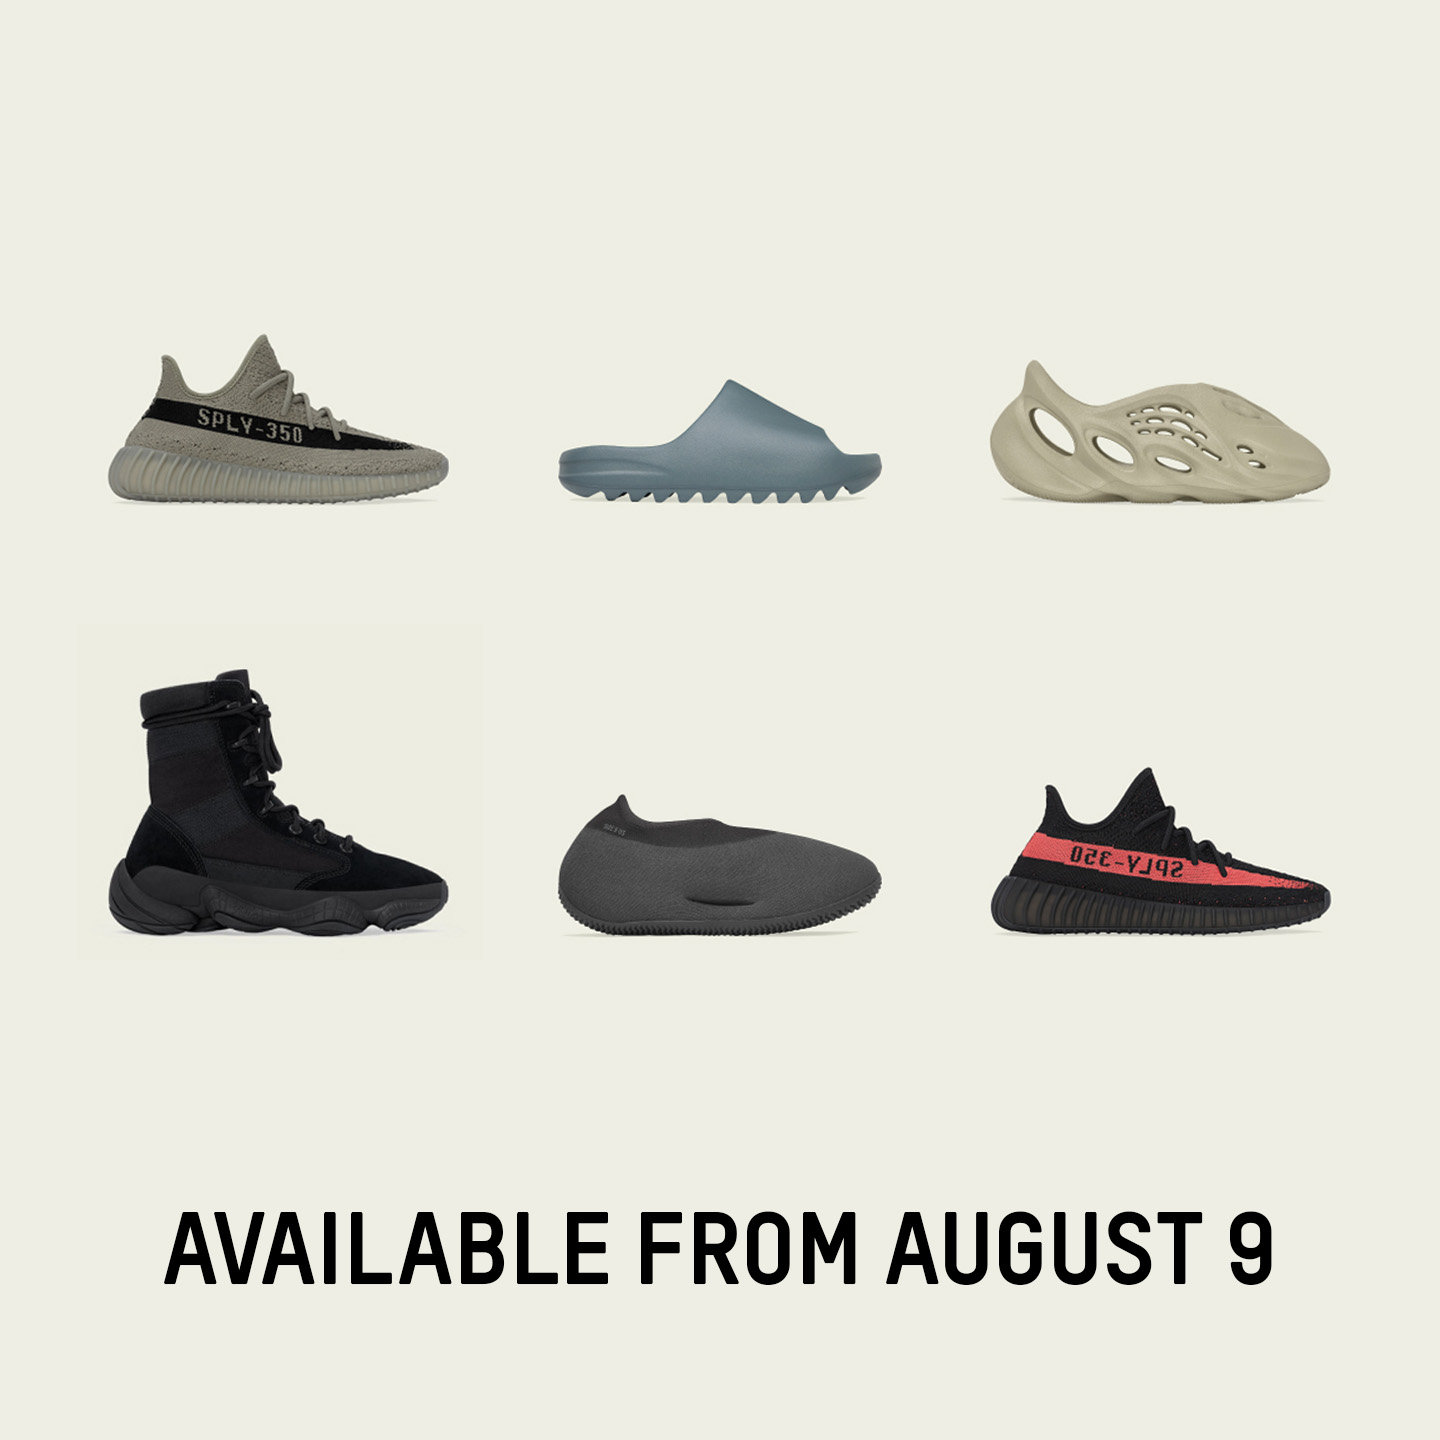 Rejse Ark Human adidas alerts on Twitter: "• YEEZY BOOST 350 V2 • YEEZY 500 HIGH TACTICAL  BOOT • YEEZY SLIDE • YEEZY FOAM RUNNER • YEEZY KNIT RUNNER adidas YEEZY  styles will be available